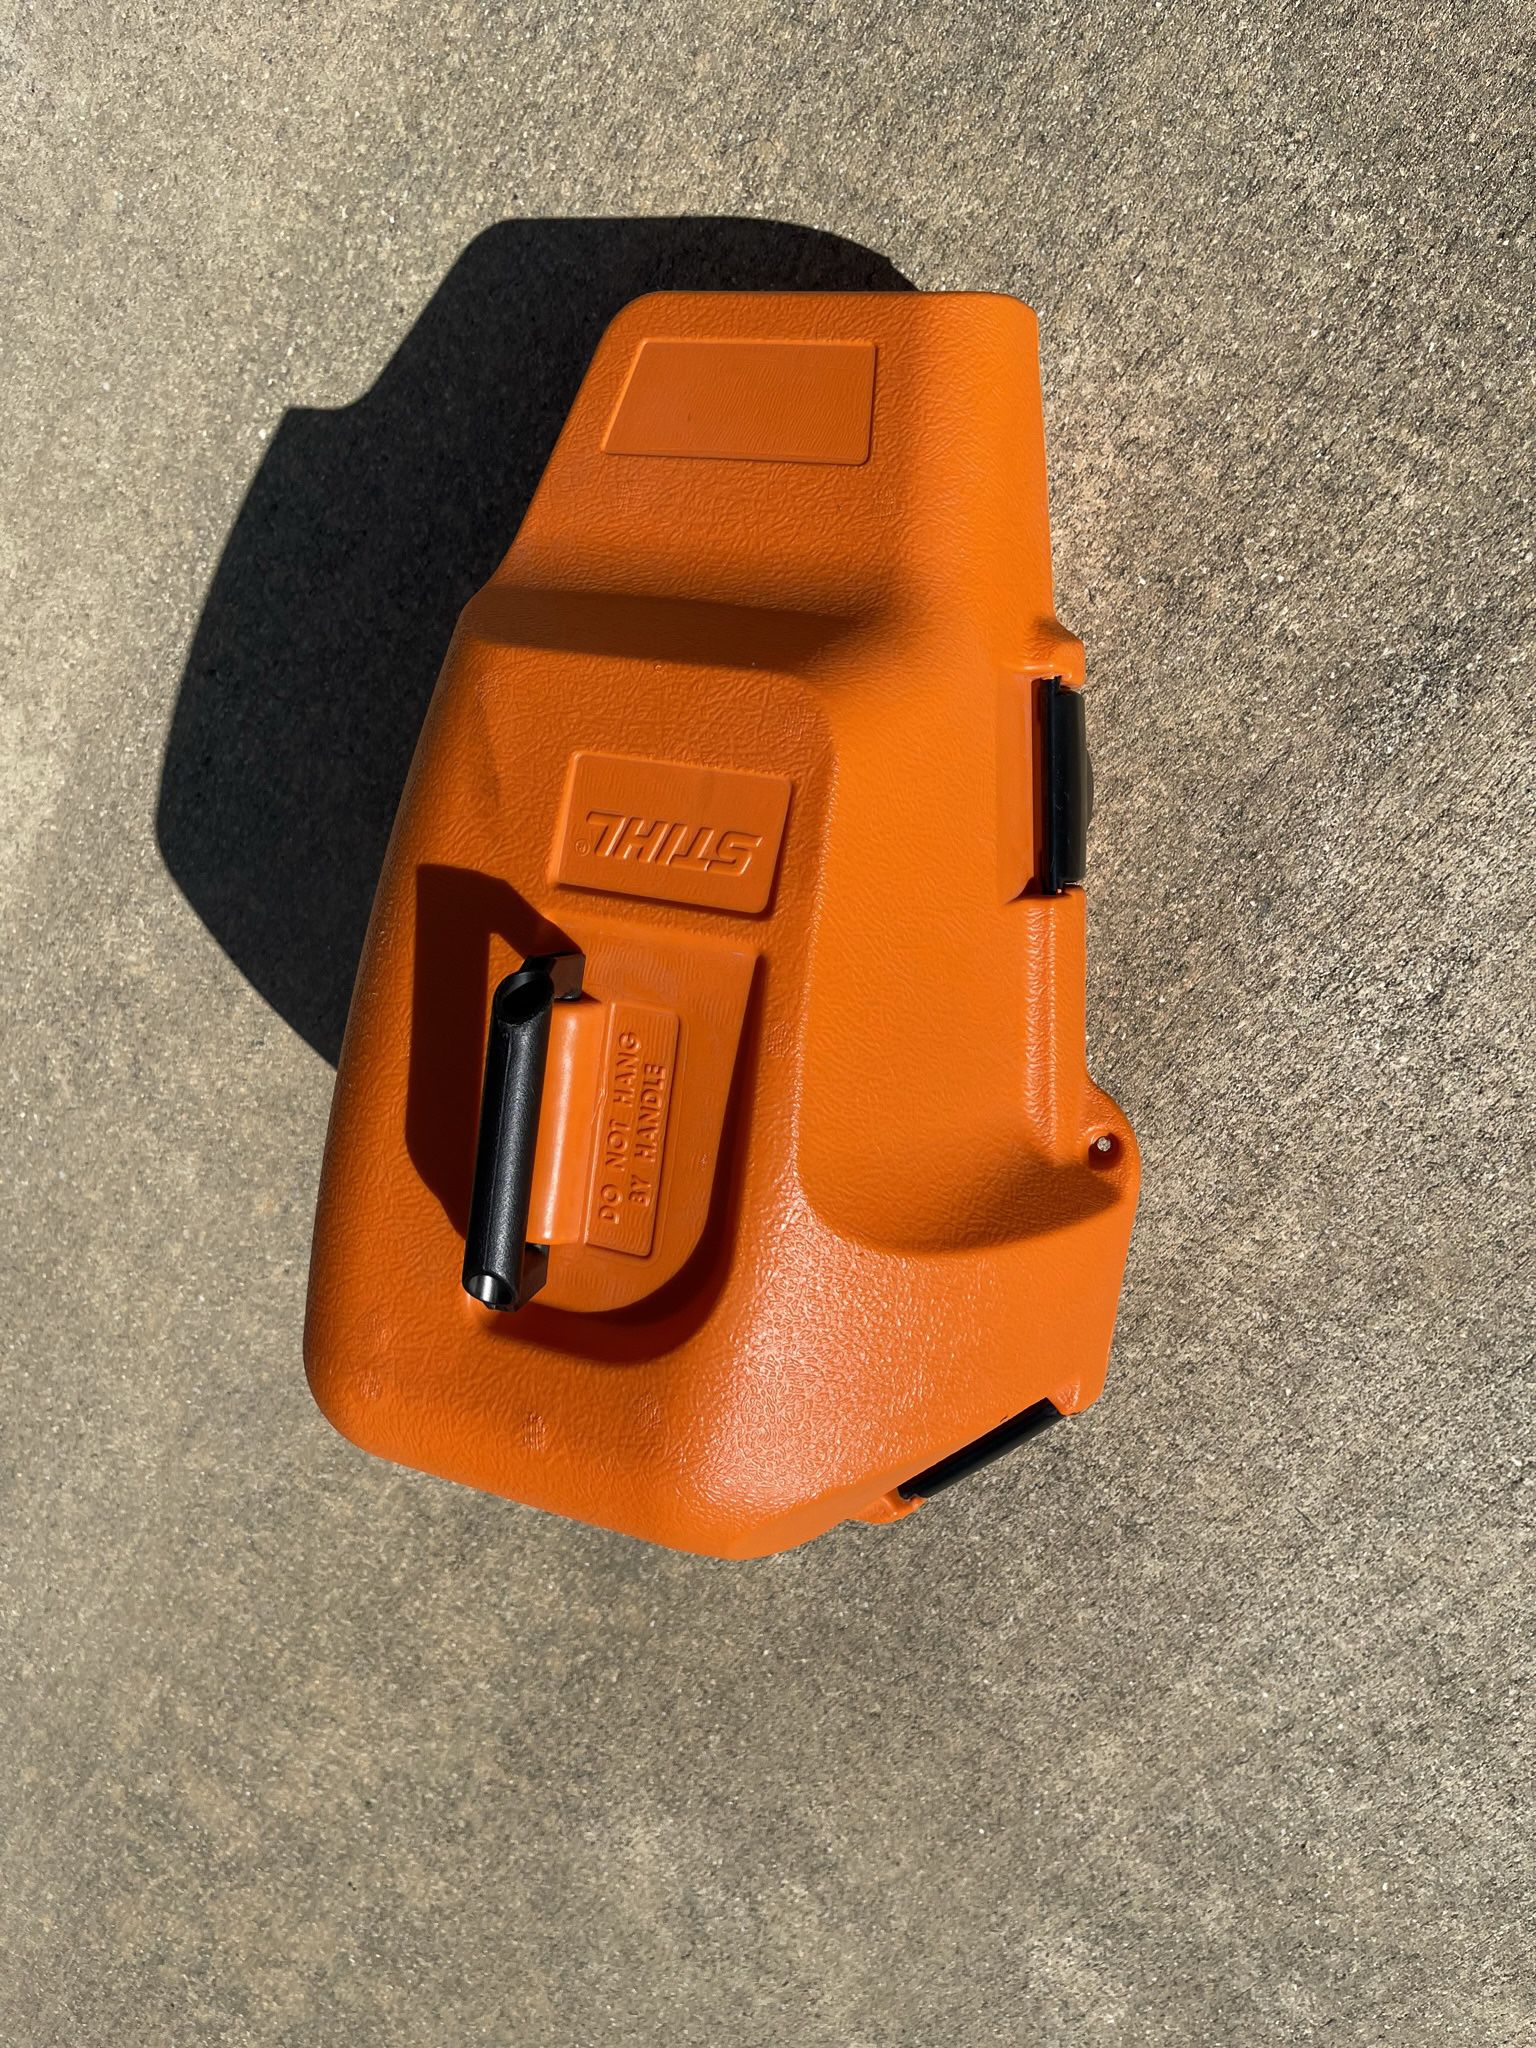 Stihl Woodmans Chainsaw Carrying Case